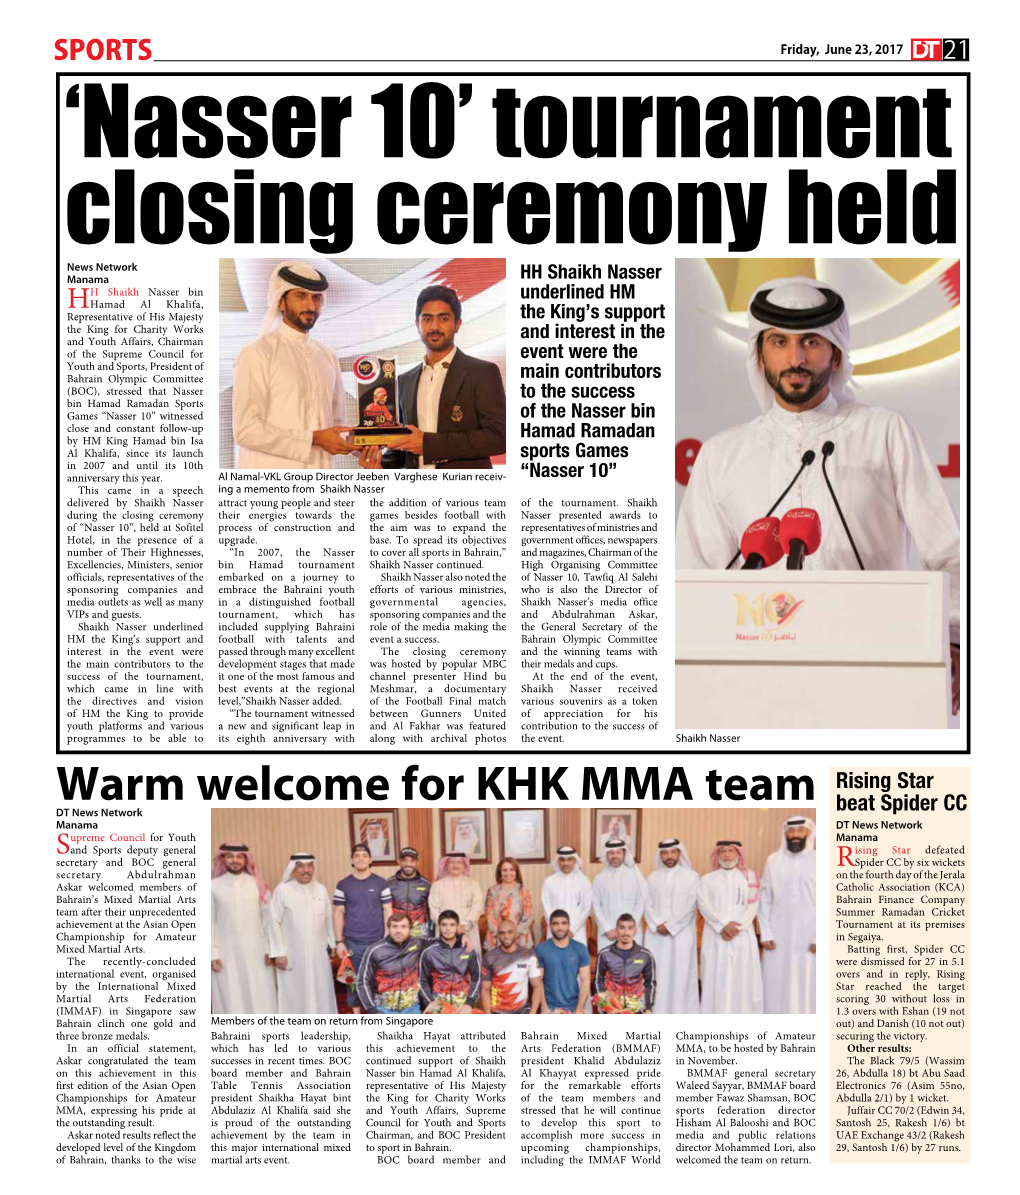 Warm Welcome for KHK MMA Team